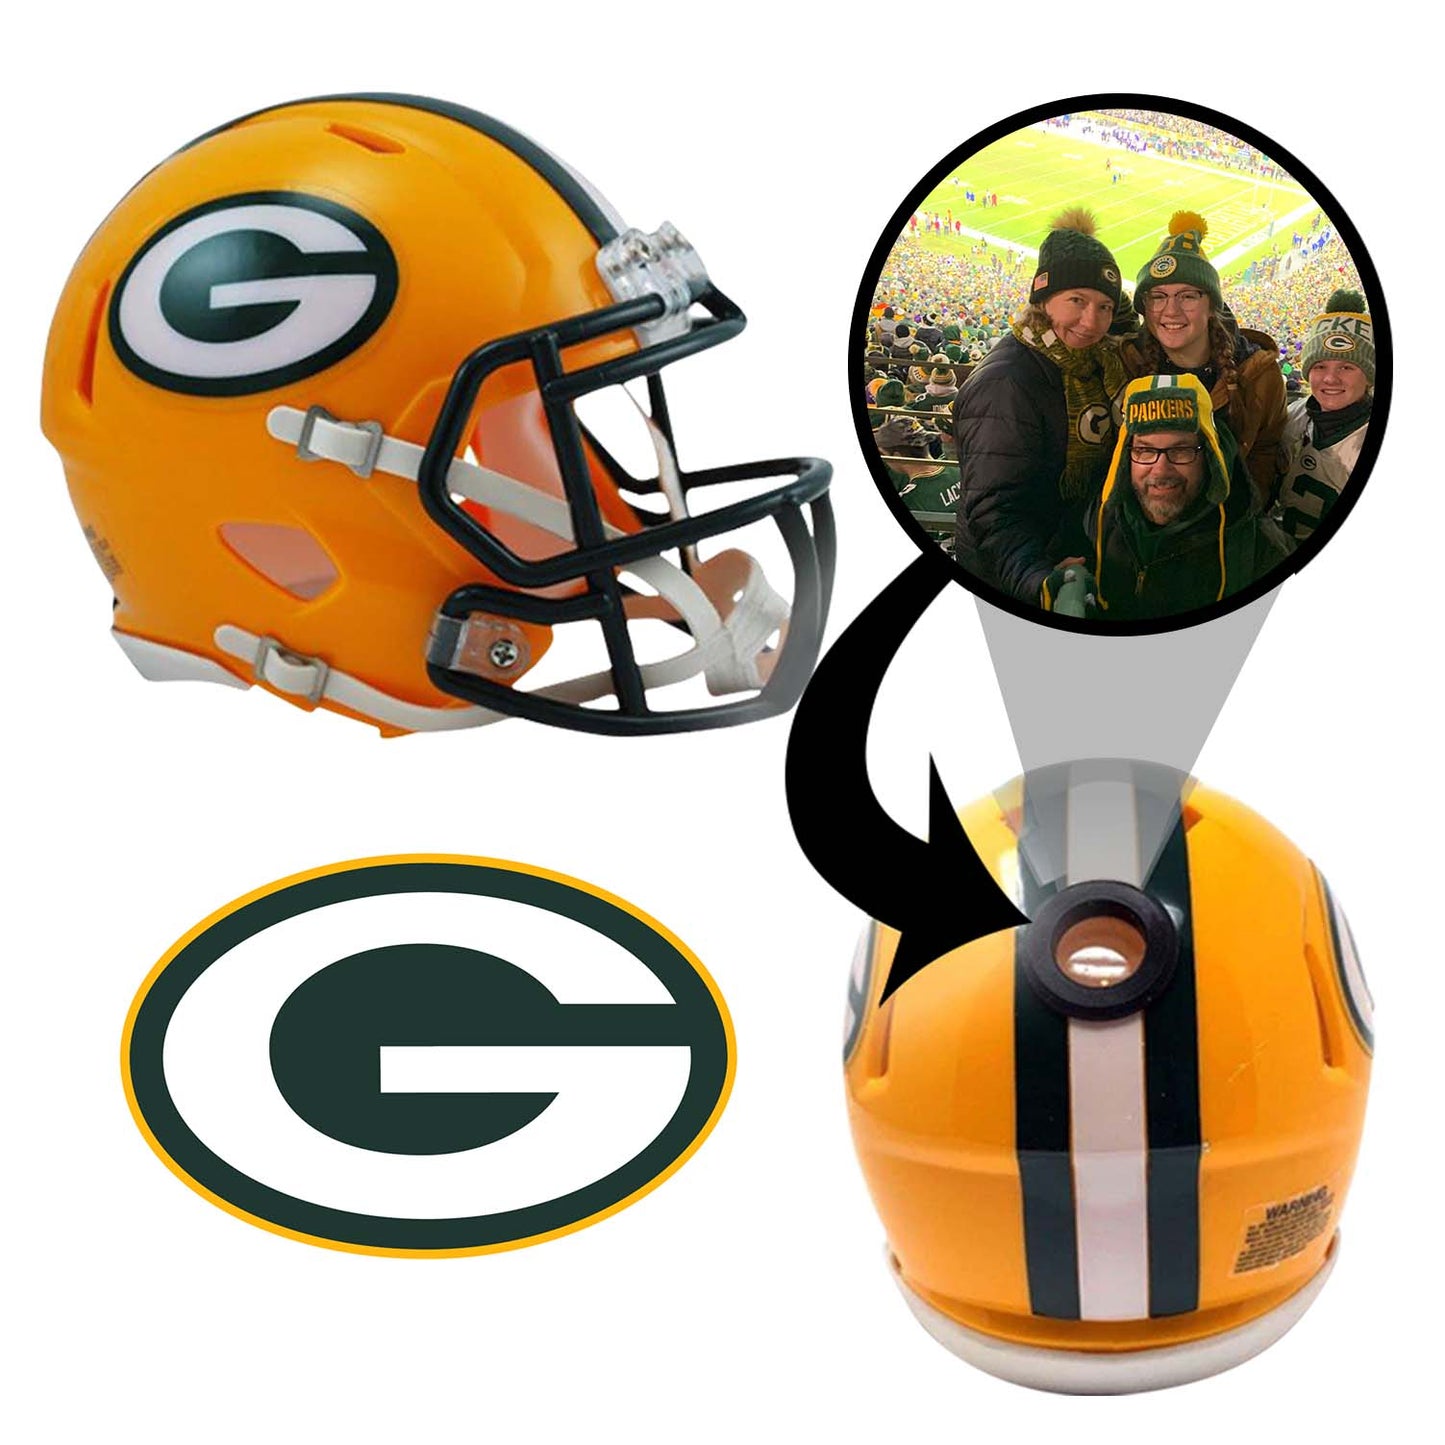 Green Bay Packers NFL Collectible Mini Helmet - Picture Inside - FANZ Collectibles